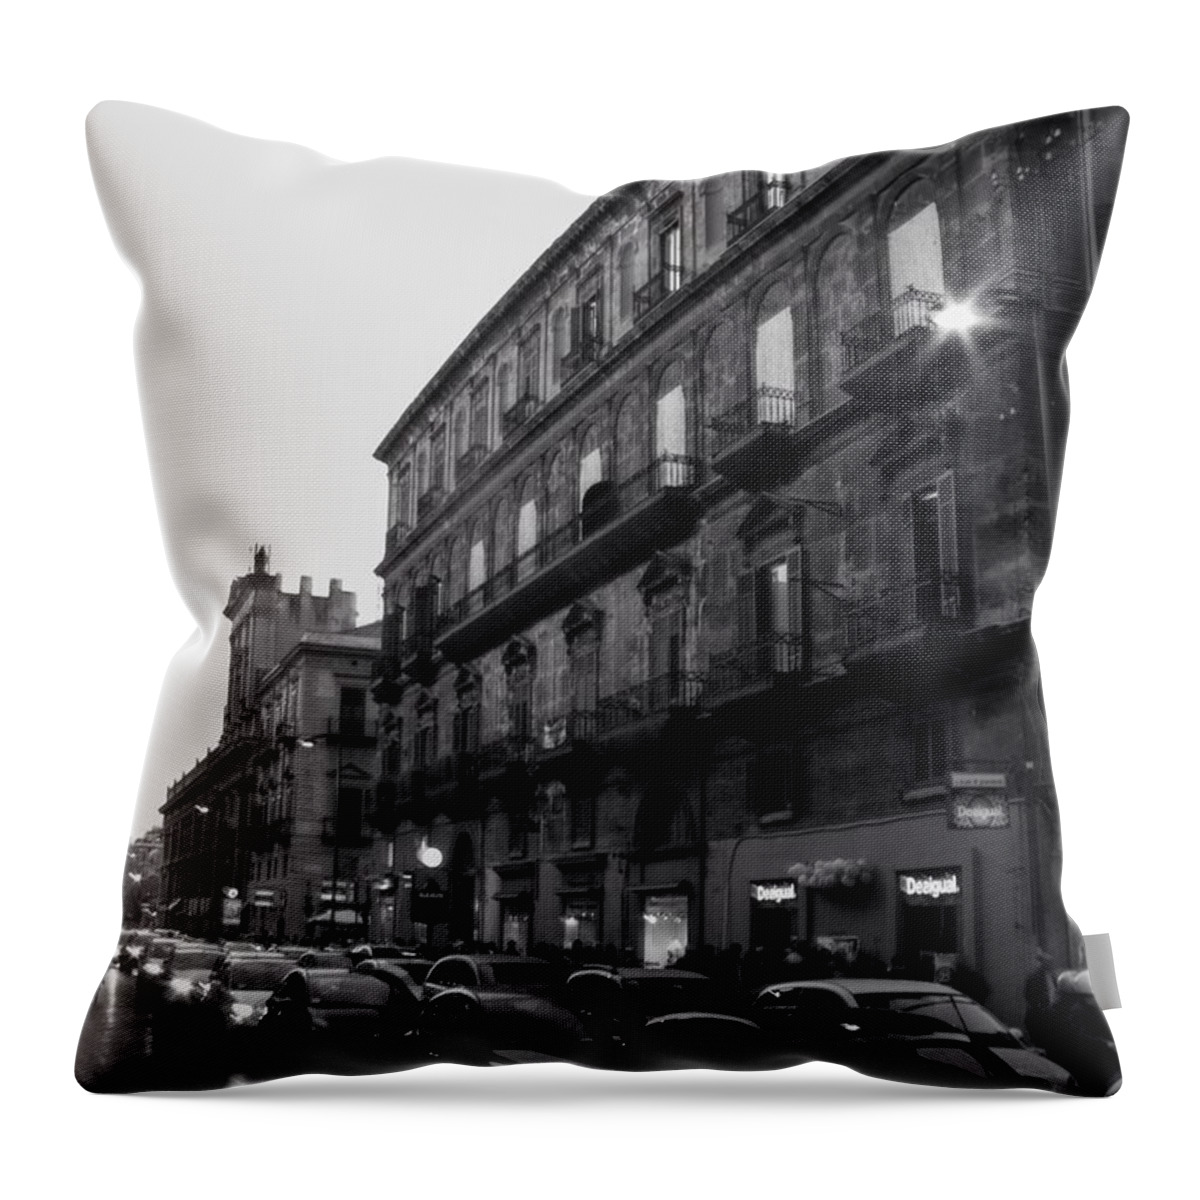 City Throw Pillow featuring the photograph Rosso by Marcello Verduci